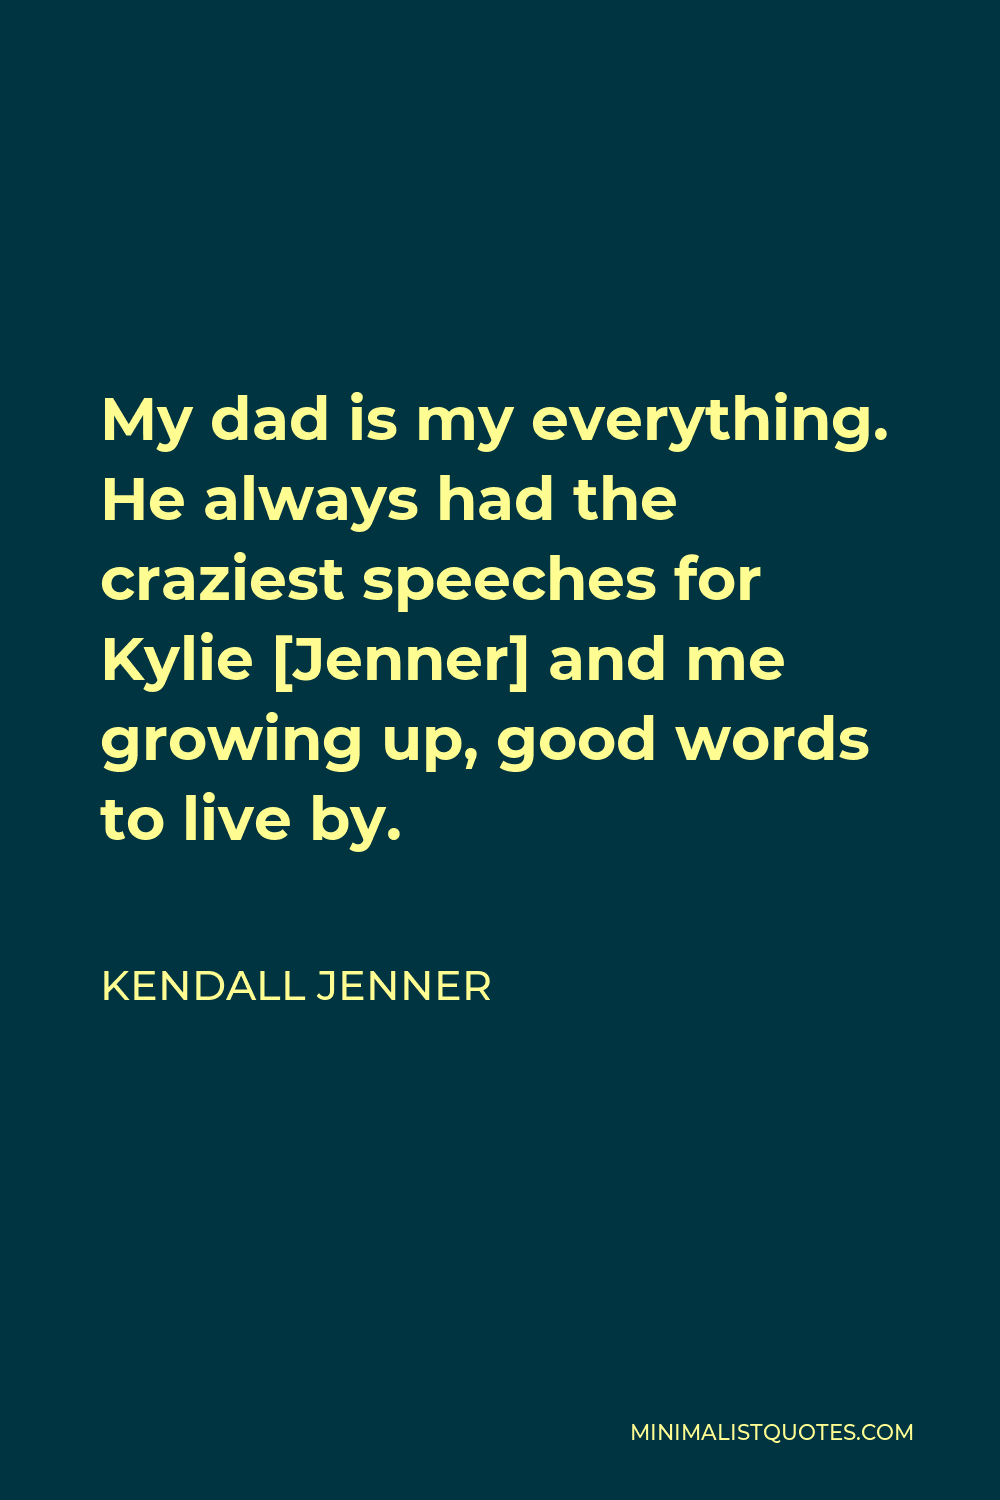 Kendall Jenner Quote - My dad is my everything. He always had the craziest speeches for Kylie [Jenner] and me growing up, good words to live by.